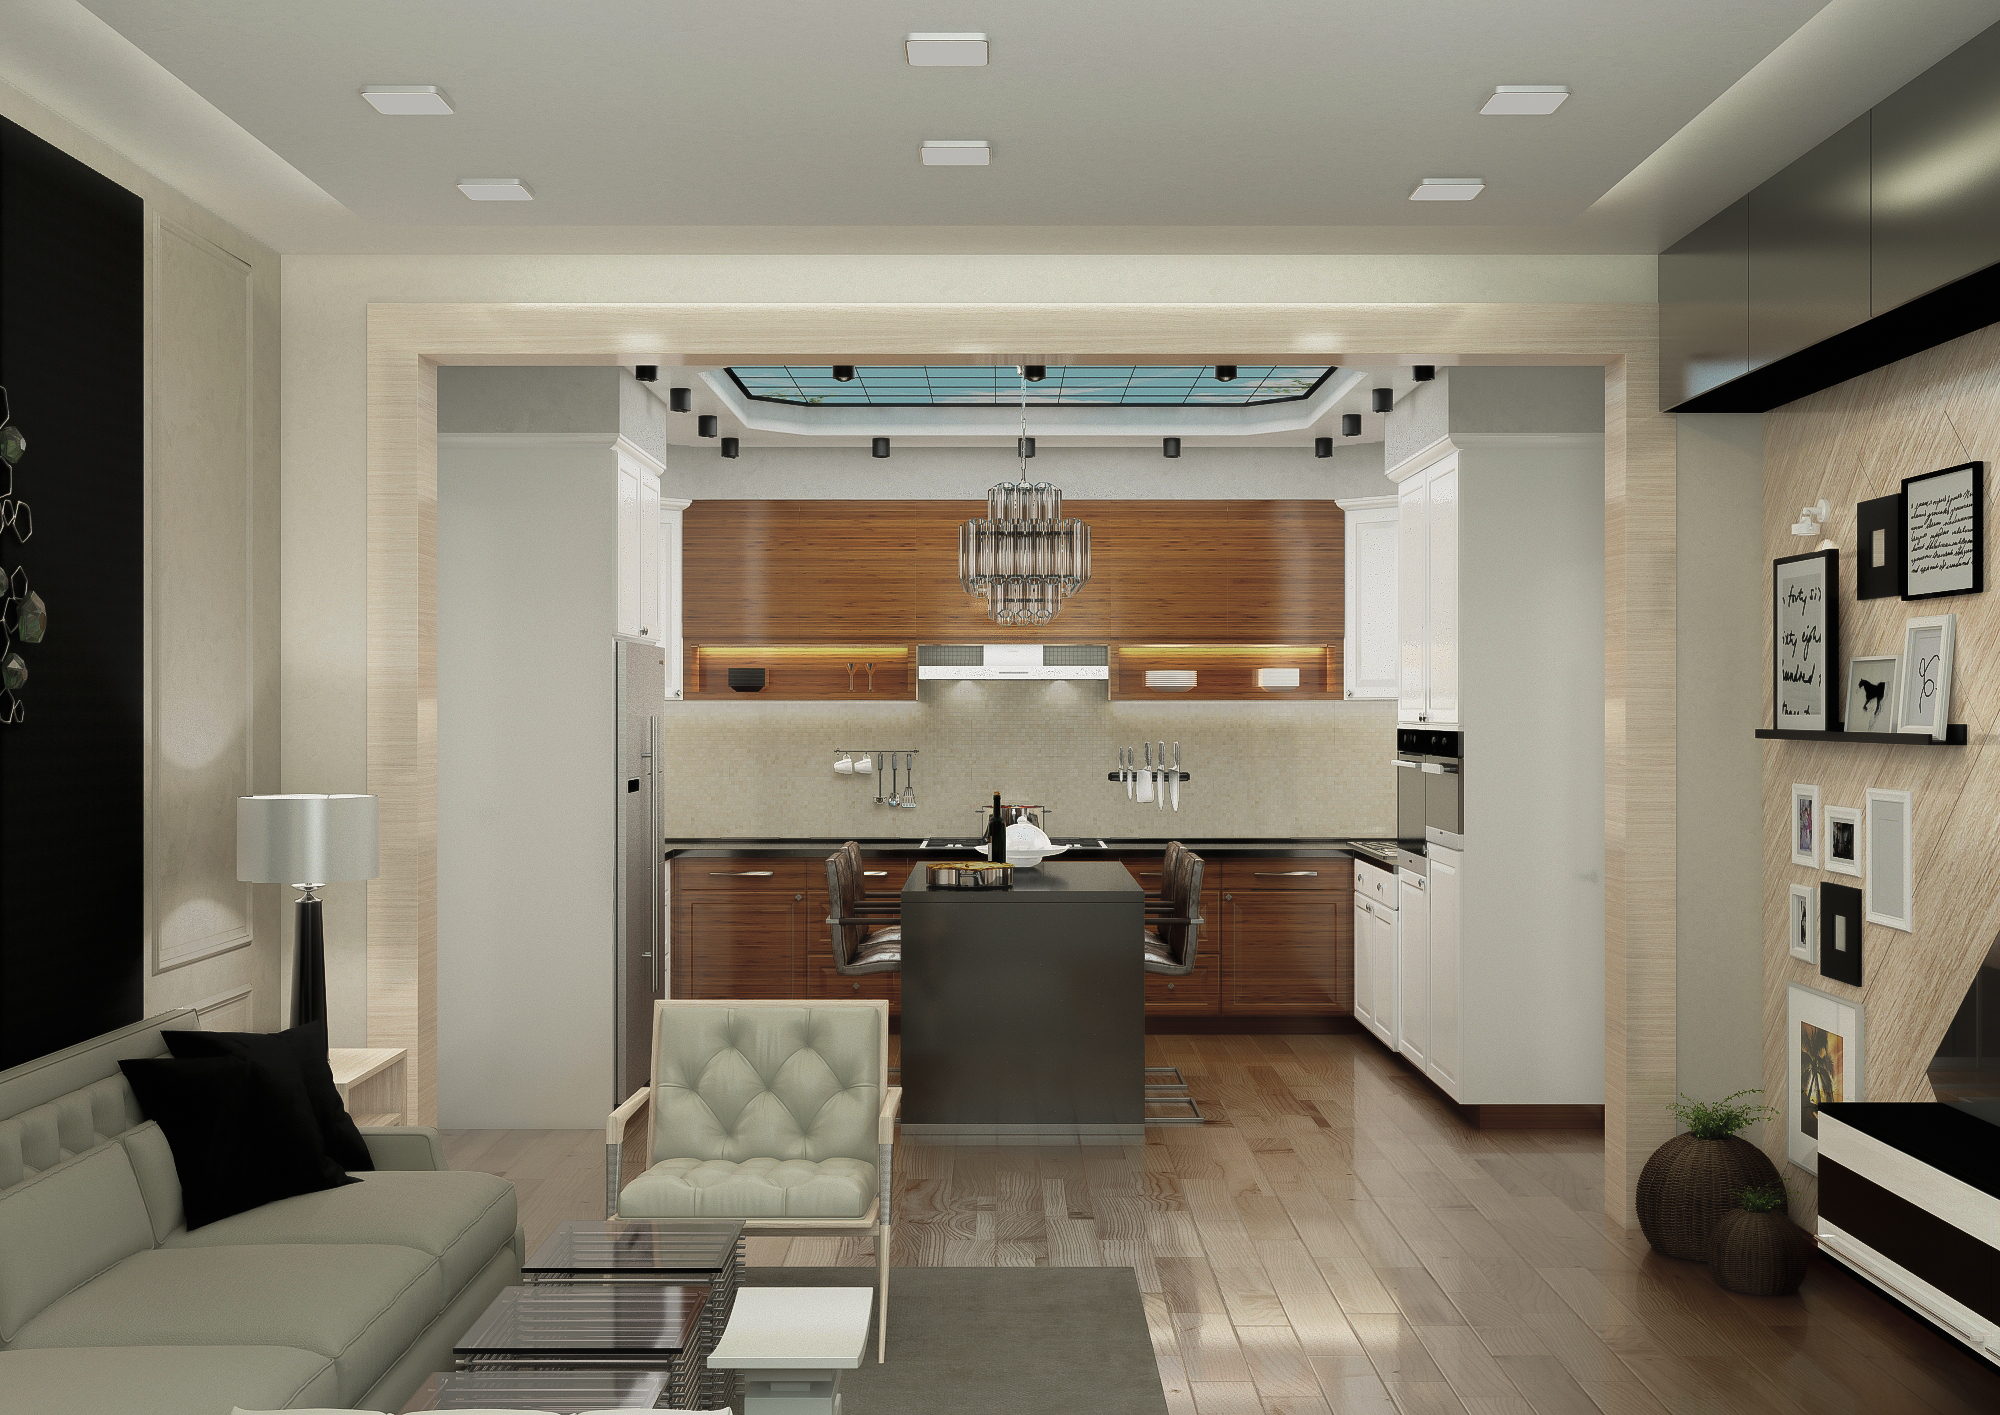 Kitchen in 3d max vray 3.0 image